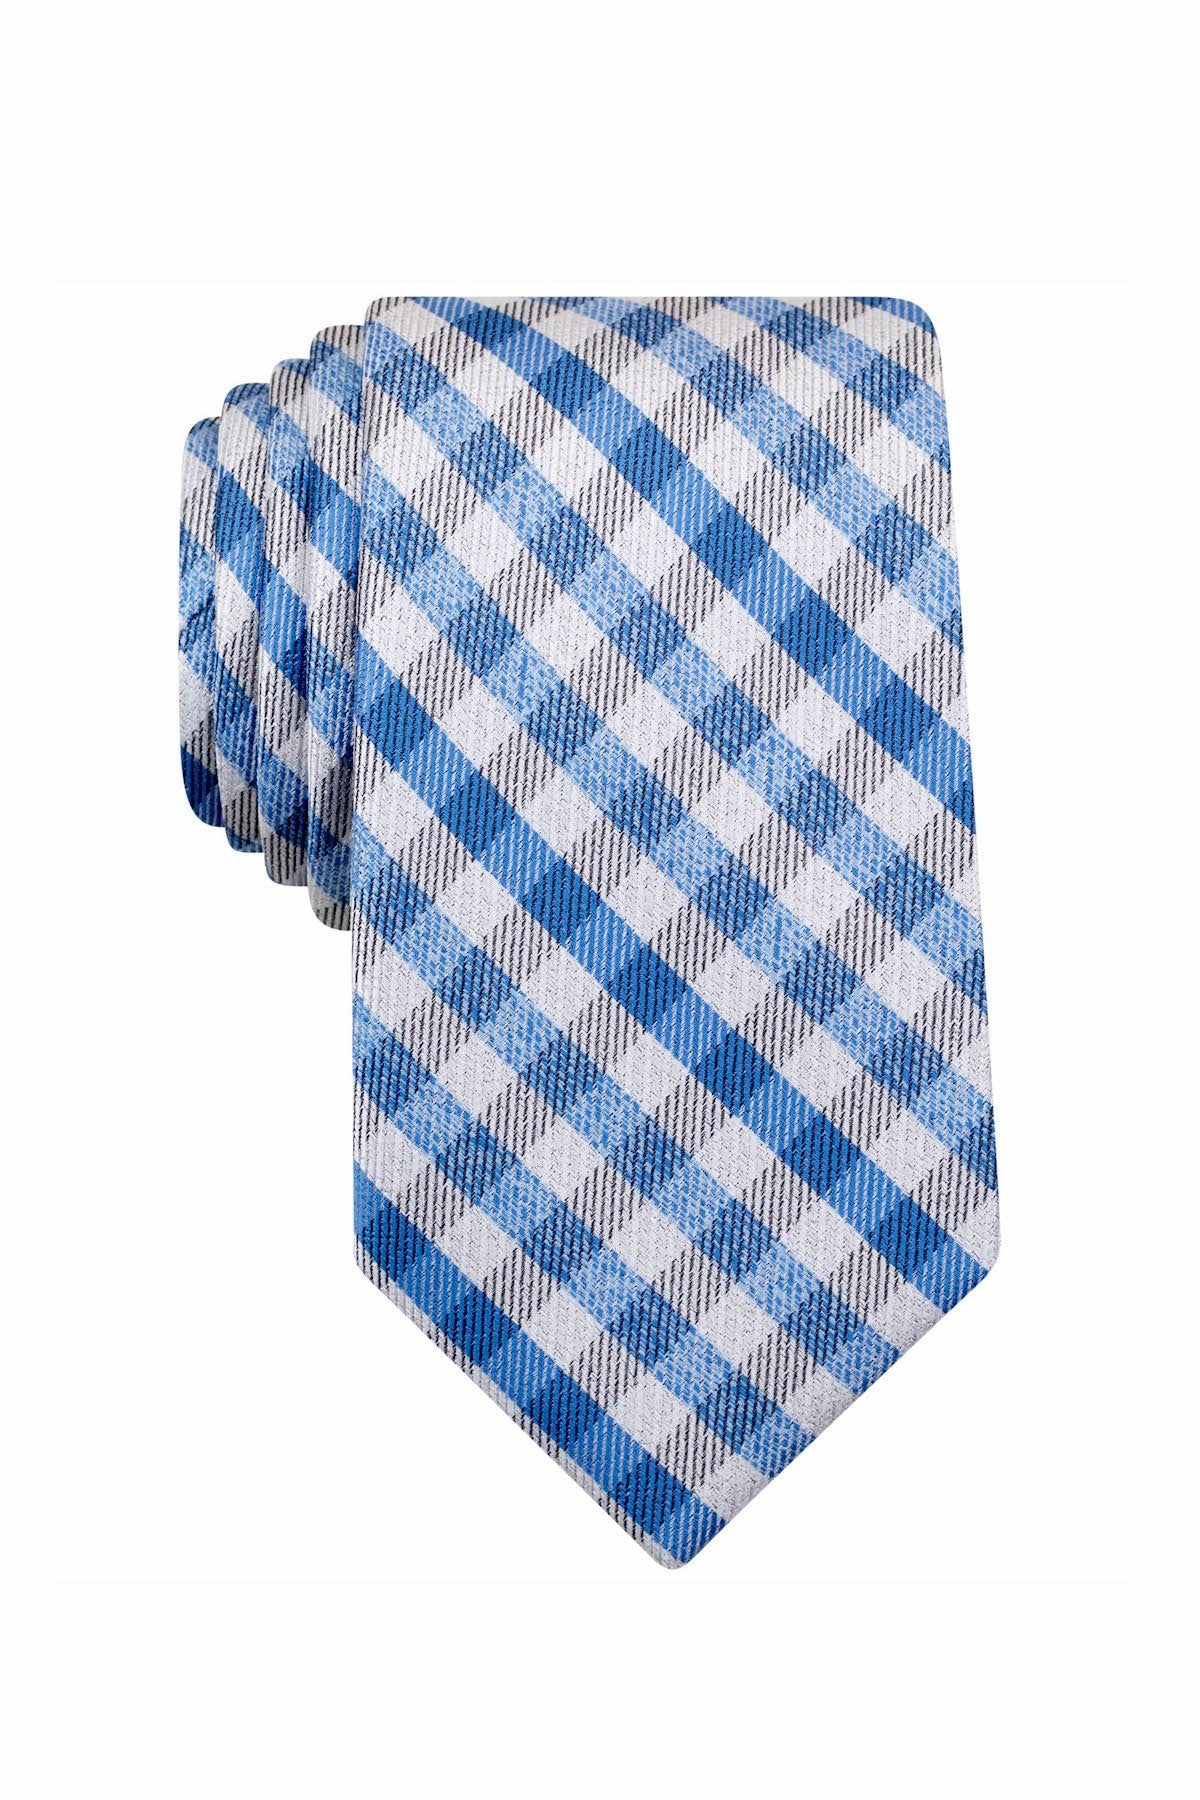 Perry Ellis Navy-Blue Williams Check Classic Tie